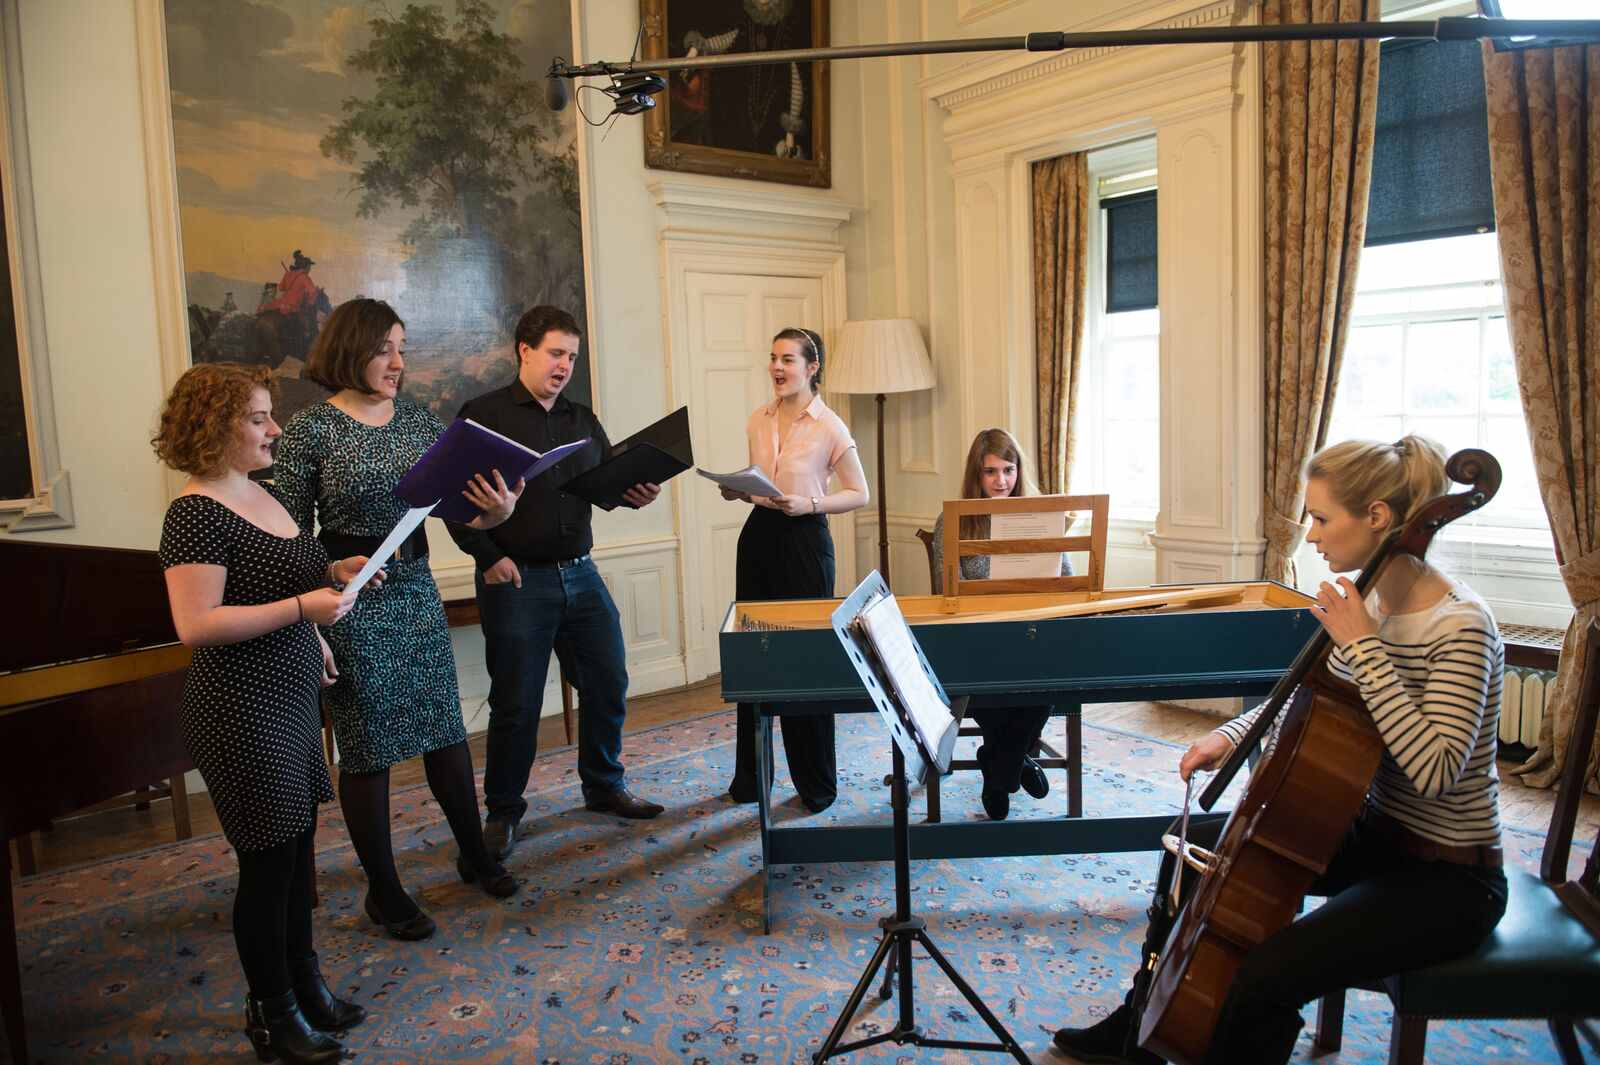 Colour photograph showing Jonathan Forbes Kennedy, baritone, recording an historically-informed performance with colleagues from Burns Period Performance Project (photo credit: AHRC-funded Editing Burns for the 21st Century research project)